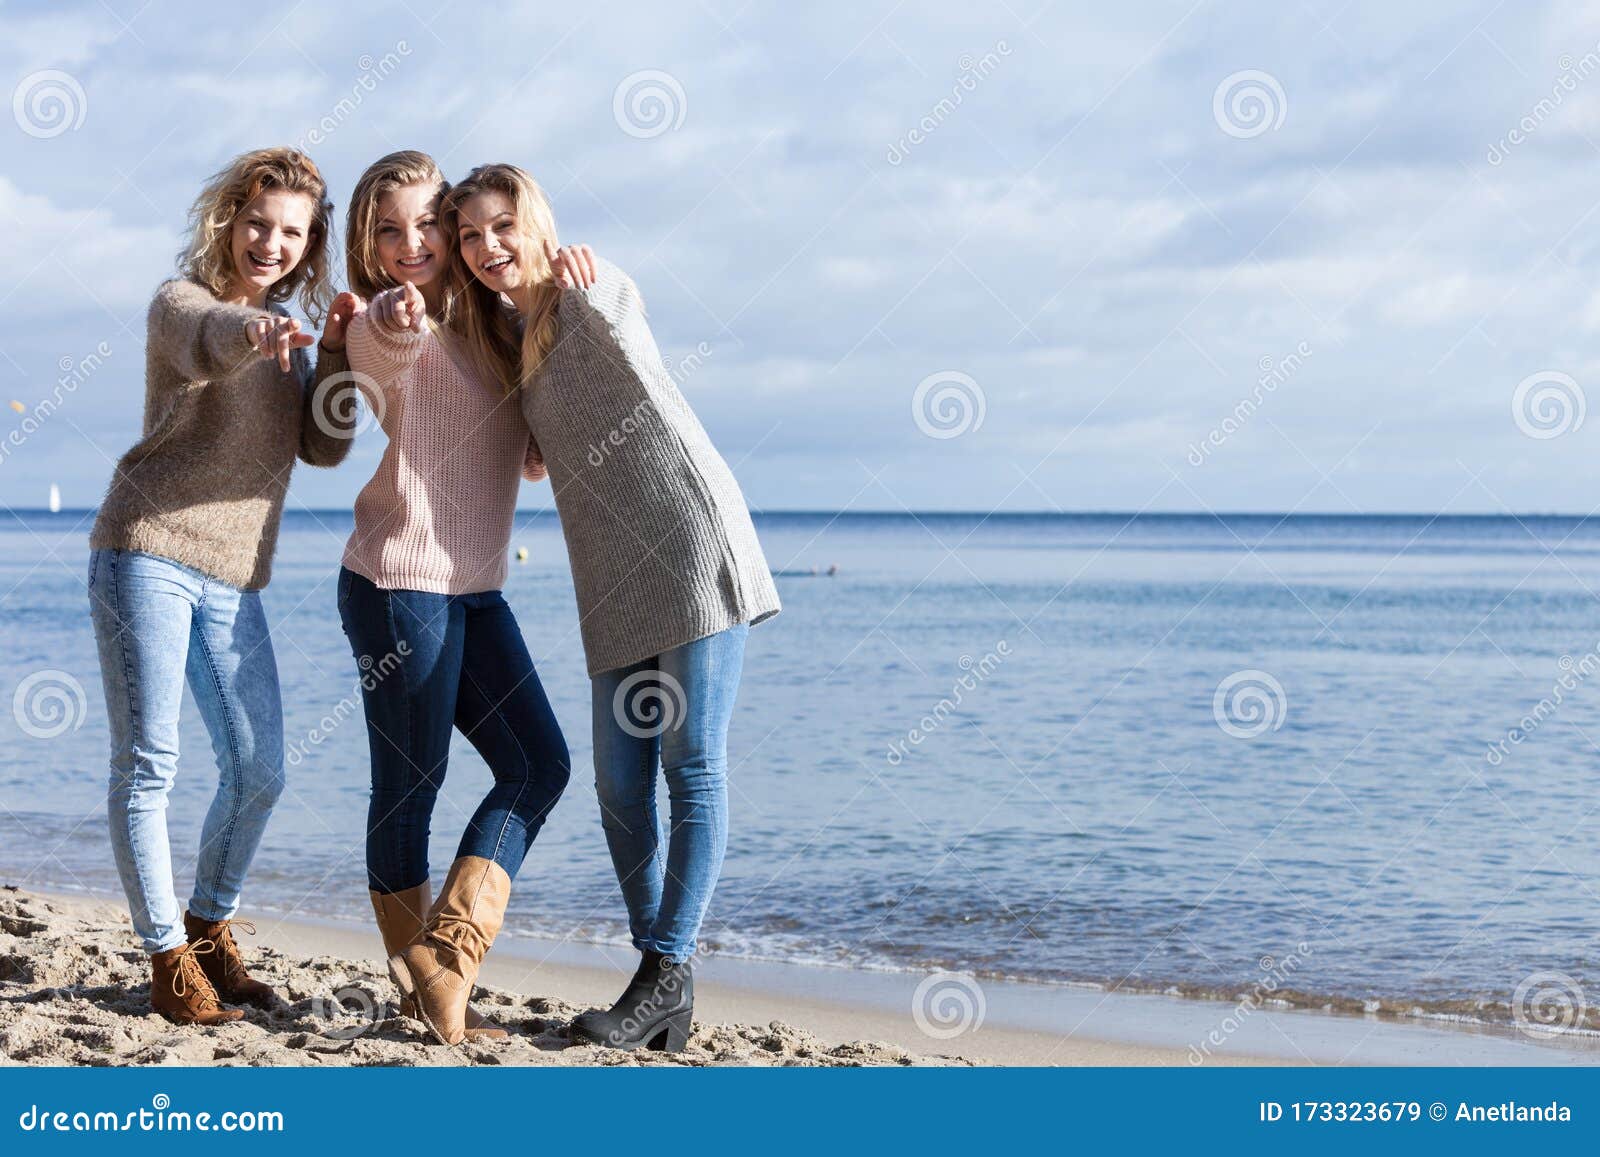 Three Fashionable Sister on the Beach Stock Image - Image of friends ...